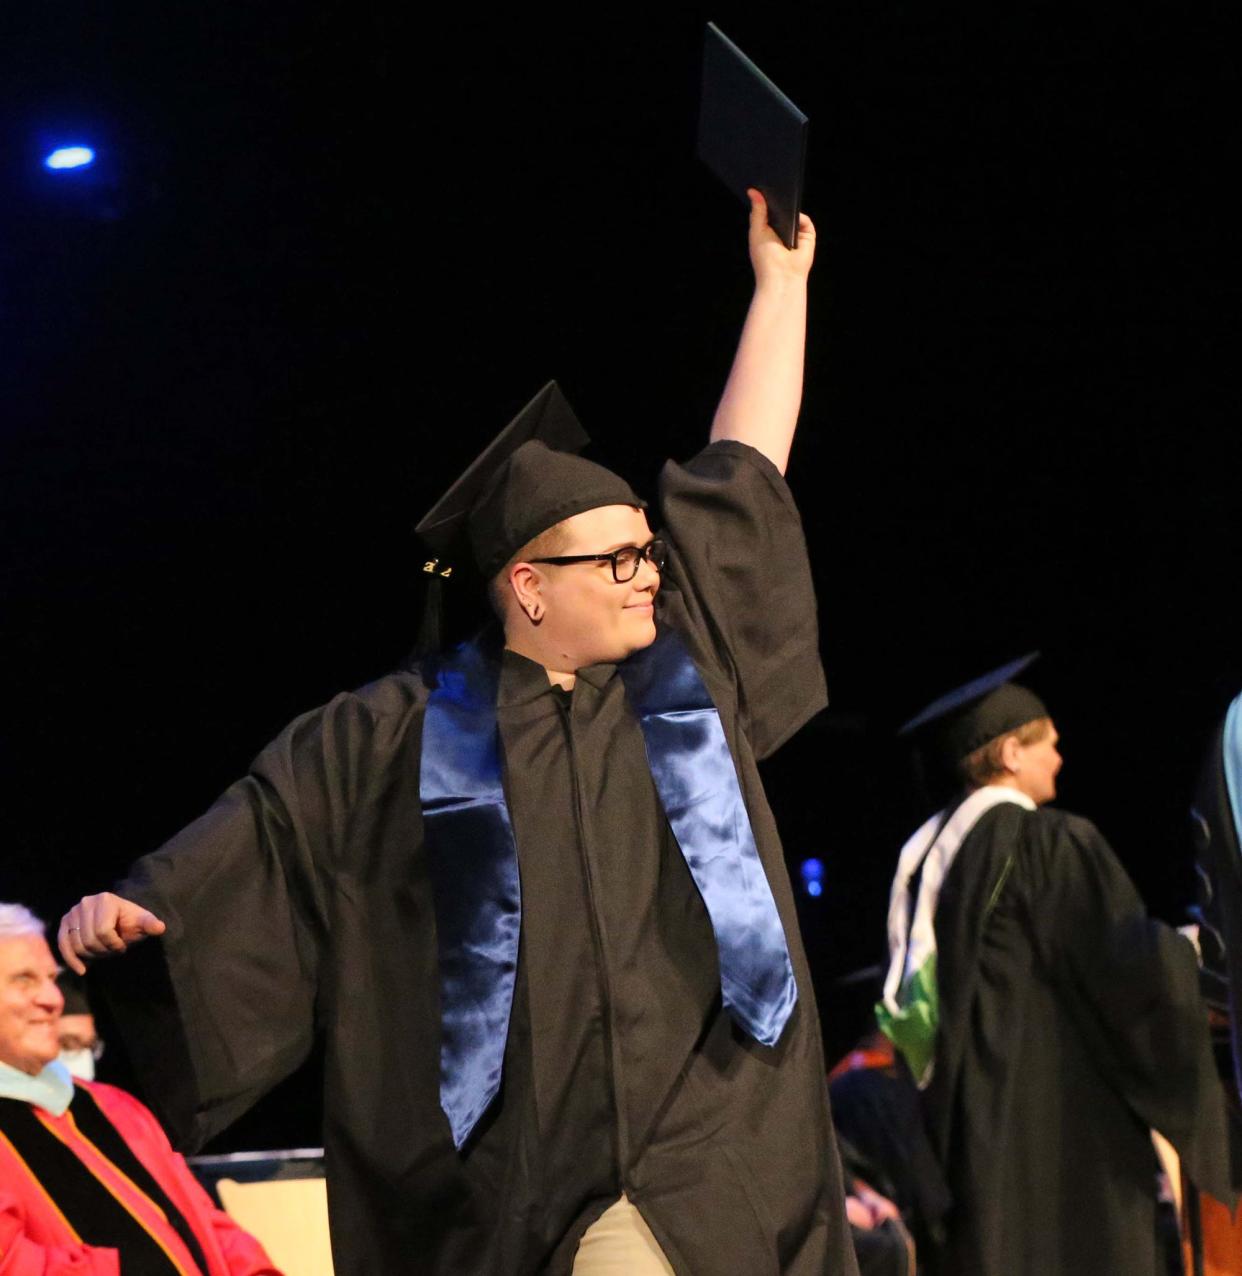 Graduates cross the stage and show off their diplomas during the 27th annual commencement address for York County Community College May 13, 2022.